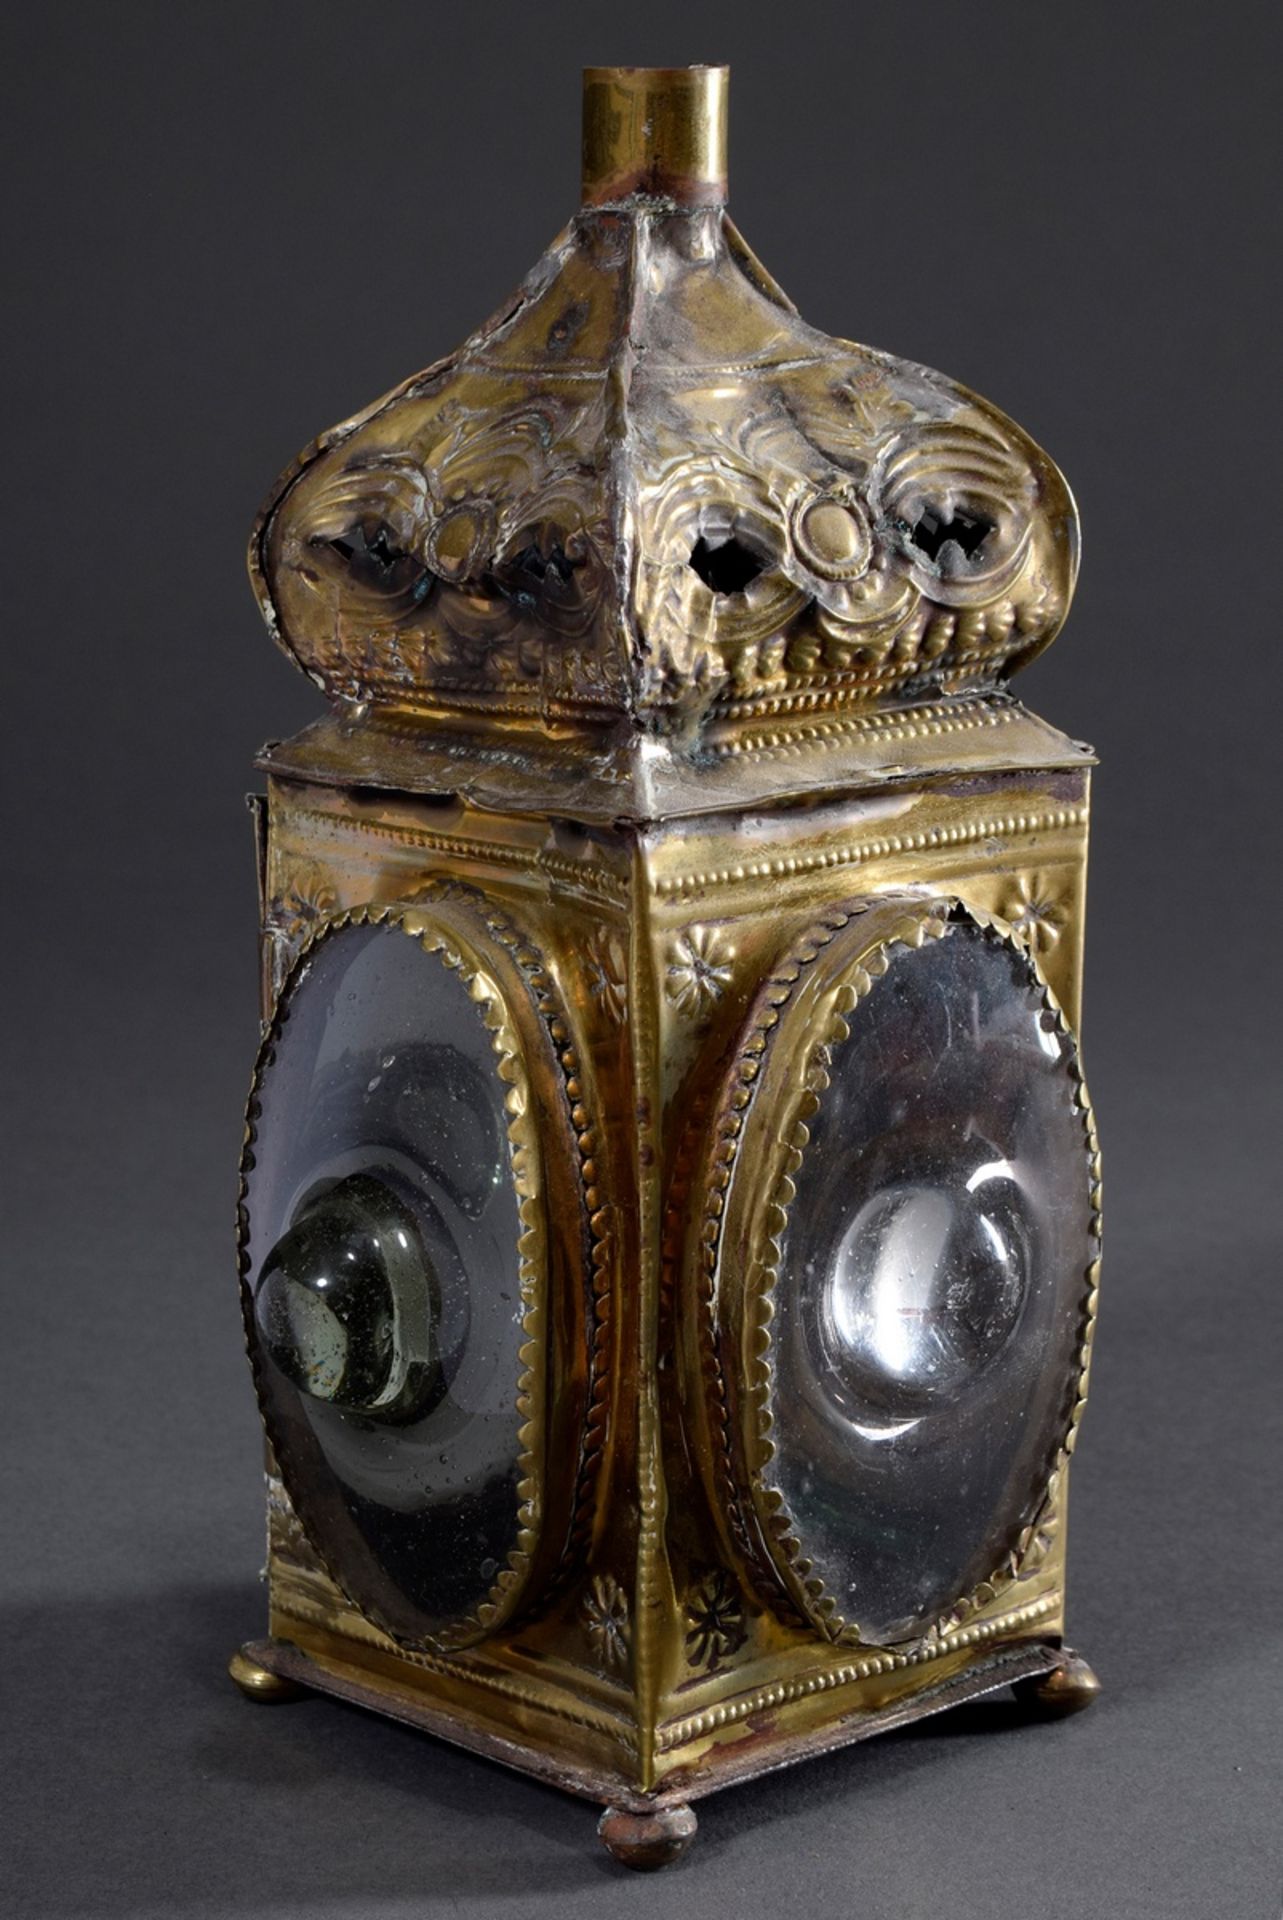 Square brass travel or night lantern with chased decoration and light green bull's eye panes, 18th 